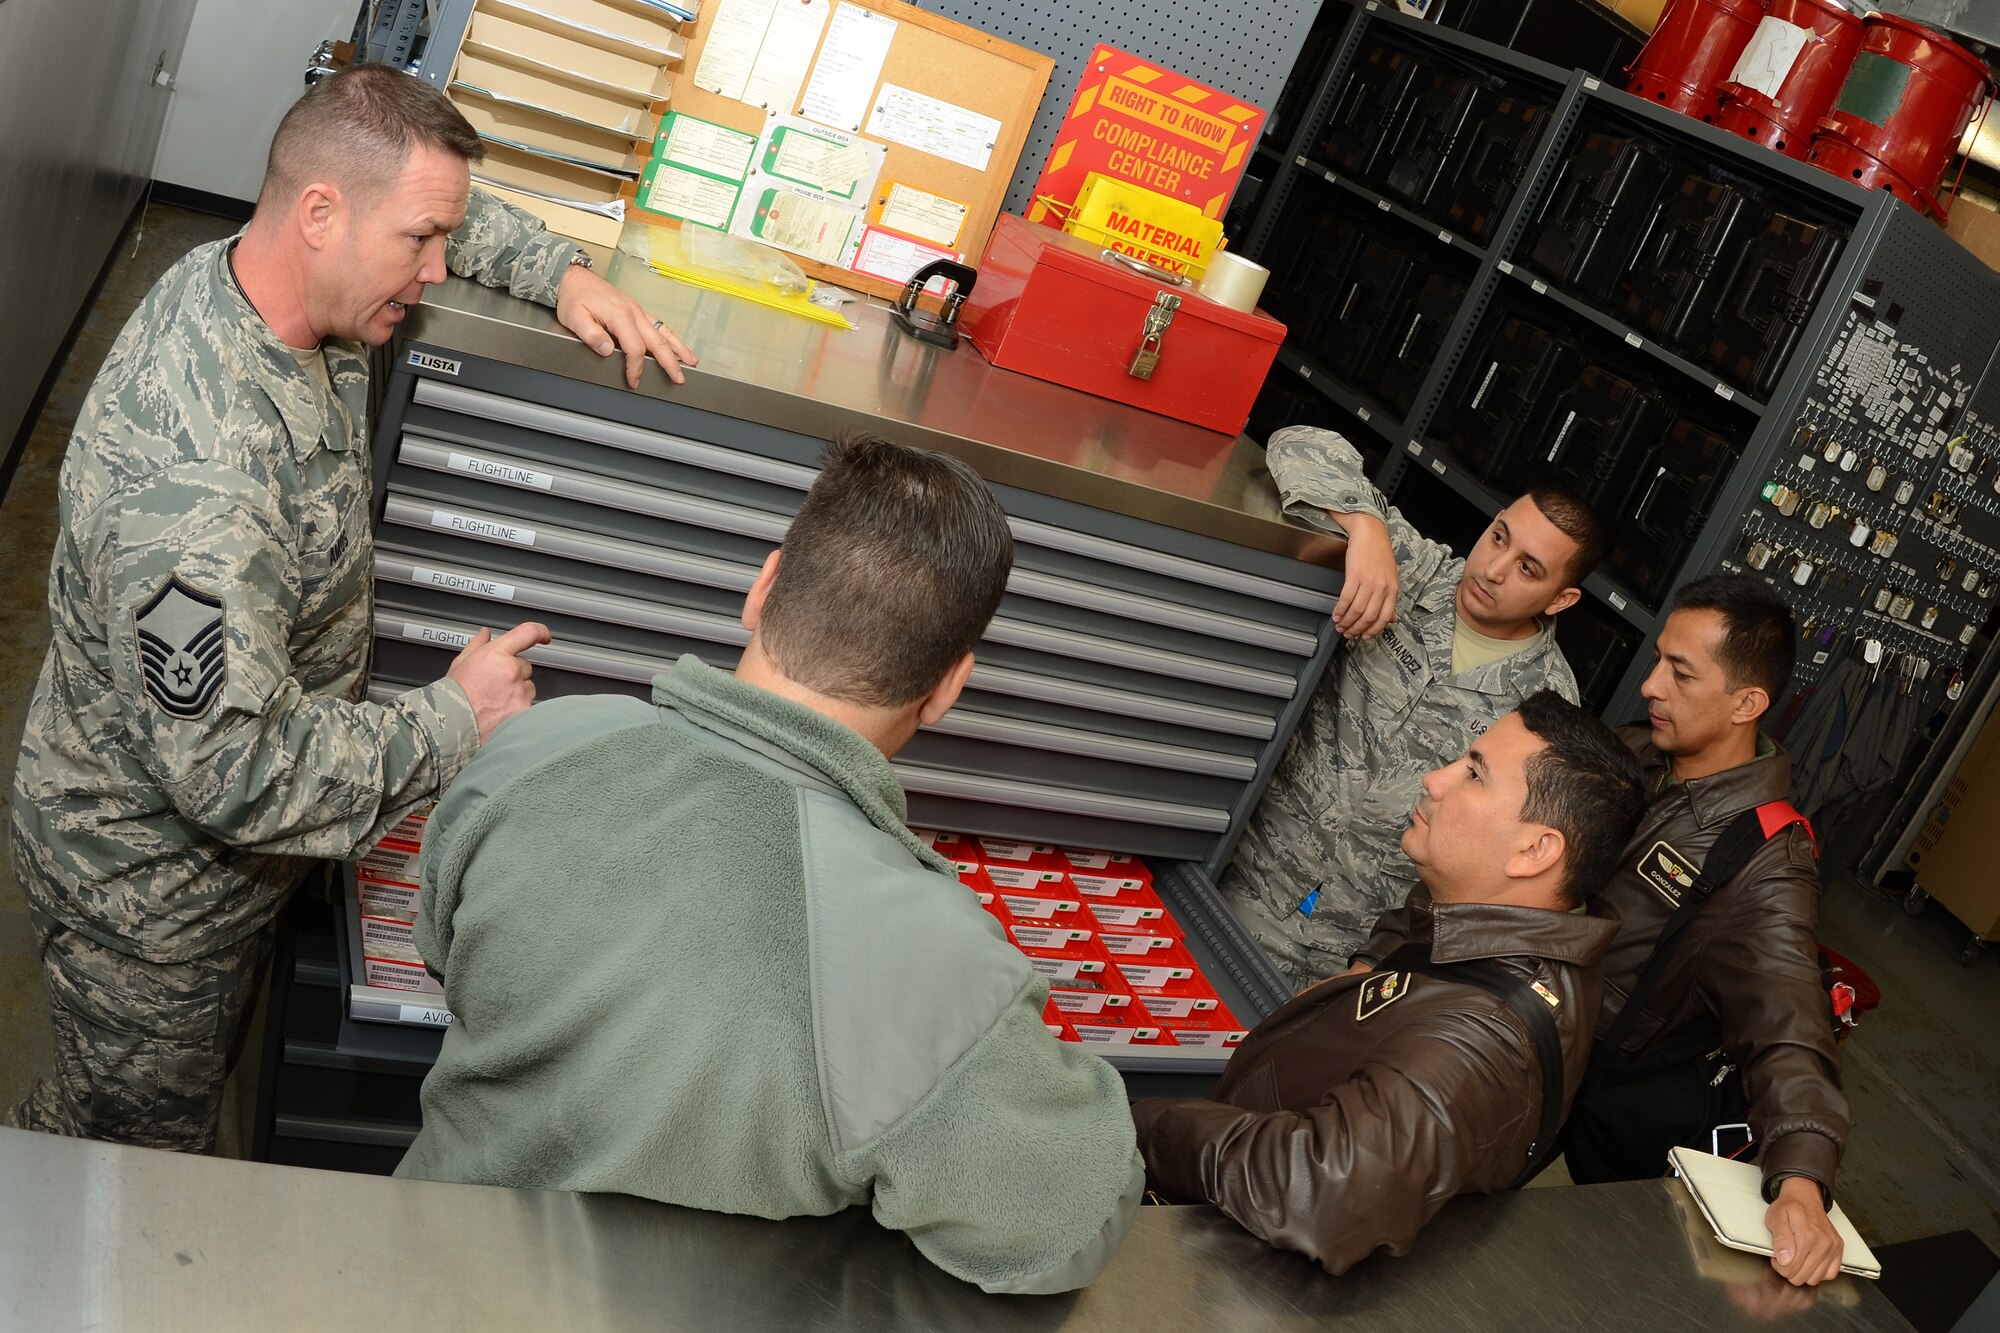 U.S. Air Force Master Sgt. Paul Amos (left), from the 169th Maintenance Squadron, provides hands-on training on tool room operations to Colombian Air Force maintenance officers Maj. Juan Gonzalez and Maj. Naily Ganem during a State Partnership Program (SPP) visit at McEntire Joint National Guard Base, S.C., Feb. 19, 2015. The Colombian Air Force sent a delegation of experts as a part of a three-day Key Leader Engagement and Subject Matter Expert exchange sharing information on flying and maintenance operations at McEntire JNGB and fostering relationships between the militaries. (U.S. Air National Guard photo by Senior Master Sgt. Edward Snyder/Released)